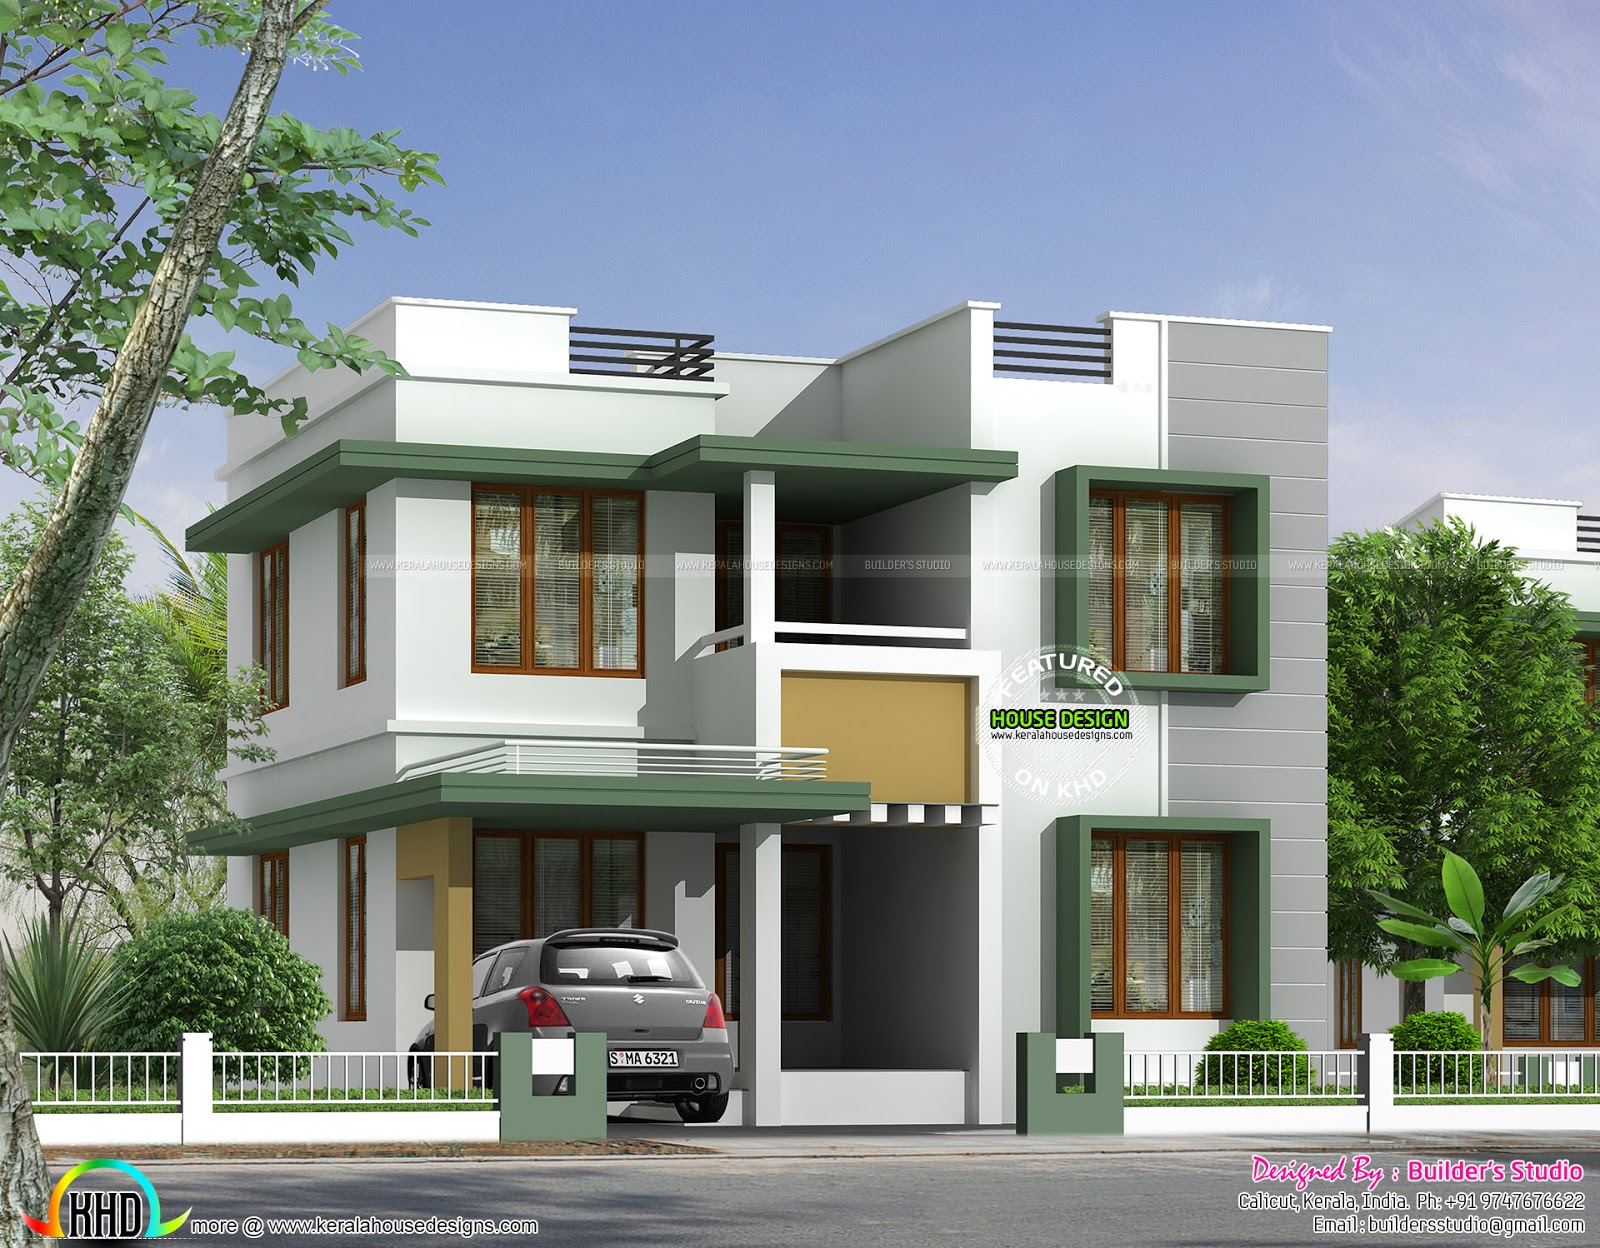  Simple  flat roof house  in Kerala  Kerala  home  design  and 